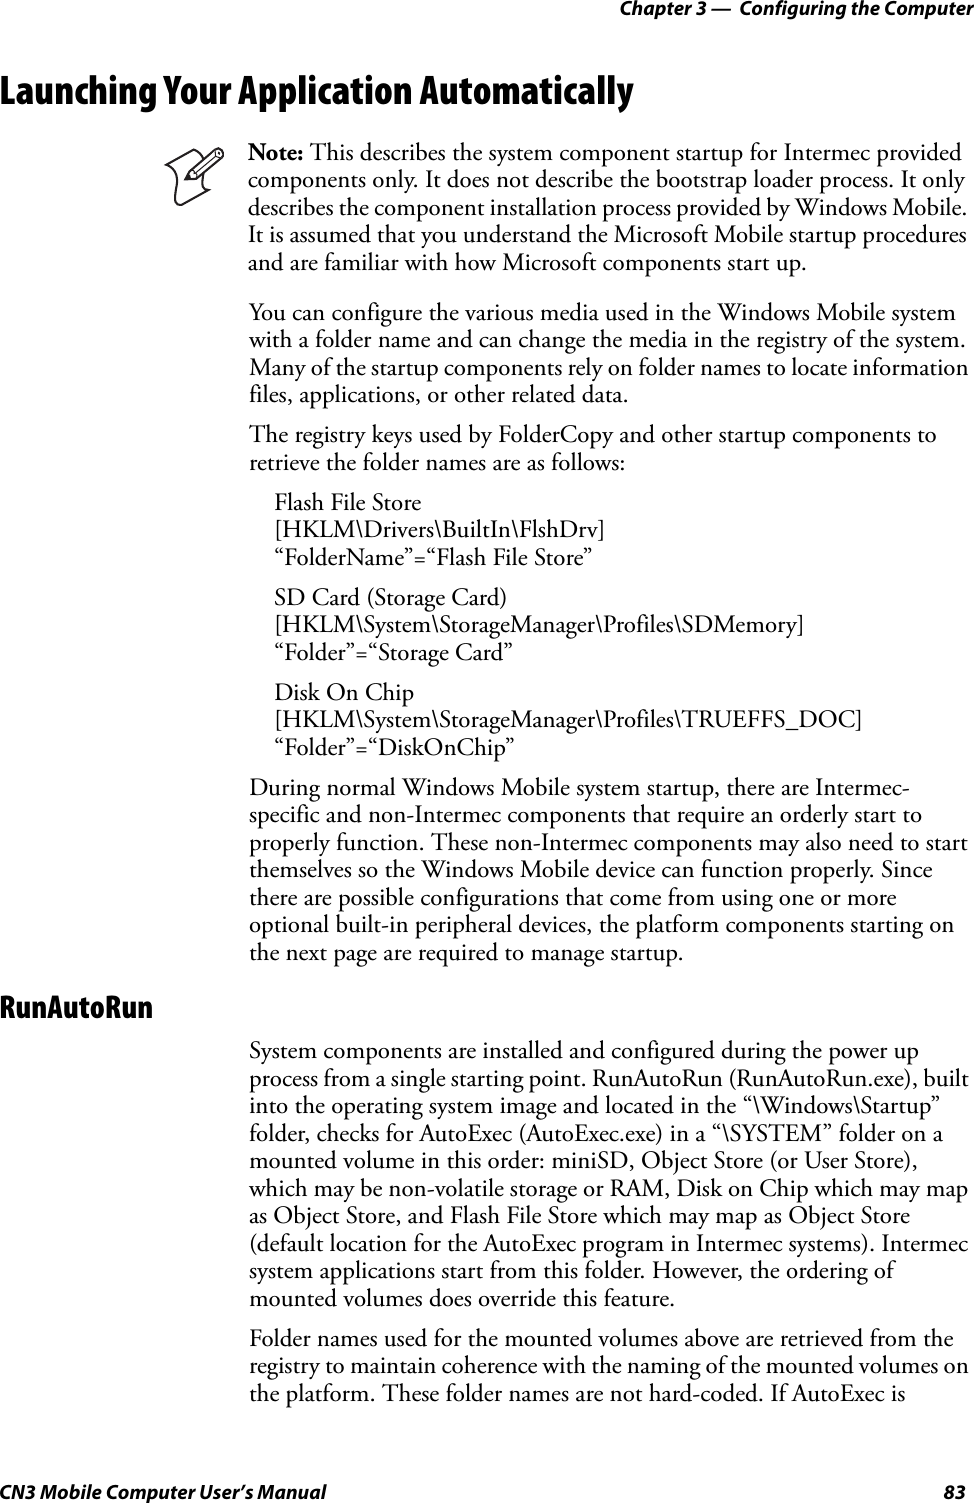 Chapter 3 —  Configuring the ComputerCN3 Mobile Computer User’s Manual 83Launching Your Application AutomaticallyYou can configure the various media used in the Windows Mobile system with a folder name and can change the media in the registry of the system. Many of the startup components rely on folder names to locate information files, applications, or other related data.The registry keys used by FolderCopy and other startup components to retrieve the folder names are as follows:Flash File Store[HKLM\Drivers\BuiltIn\FlshDrv]“FolderName”=“Flash File Store”SD Card (Storage Card)[HKLM\System\StorageManager\Profiles\SDMemory]“Folder”=“Storage Card”Disk On Chip[HKLM\System\StorageManager\Profiles\TRUEFFS_DOC]“Folder”=“DiskOnChip”During normal Windows Mobile system startup, there are Intermec-specific and non-Intermec components that require an orderly start to properly function. These non-Intermec components may also need to start themselves so the Windows Mobile device can function properly. Since there are possible configurations that come from using one or more optional built-in peripheral devices, the platform components starting on the next page are required to manage startup.RunAutoRunSystem components are installed and configured during the power up process from a single starting point. RunAutoRun (RunAutoRun.exe), built into the operating system image and located in the “\Windows\Startup” folder, checks for AutoExec (AutoExec.exe) in a “\SYSTEM” folder on a mounted volume in this order: miniSD, Object Store (or User Store), which may be non-volatile storage or RAM, Disk on Chip which may map as Object Store, and Flash File Store which may map as Object Store (default location for the AutoExec program in Intermec systems). Intermec system applications start from this folder. However, the ordering of mounted volumes does override this feature.Folder names used for the mounted volumes above are retrieved from the registry to maintain coherence with the naming of the mounted volumes on the platform. These folder names are not hard-coded. If AutoExec is Note: This describes the system component startup for Intermec provided components only. It does not describe the bootstrap loader process. It only describes the component installation process provided by Windows Mobile. It is assumed that you understand the Microsoft Mobile startup procedures and are familiar with how Microsoft components start up.